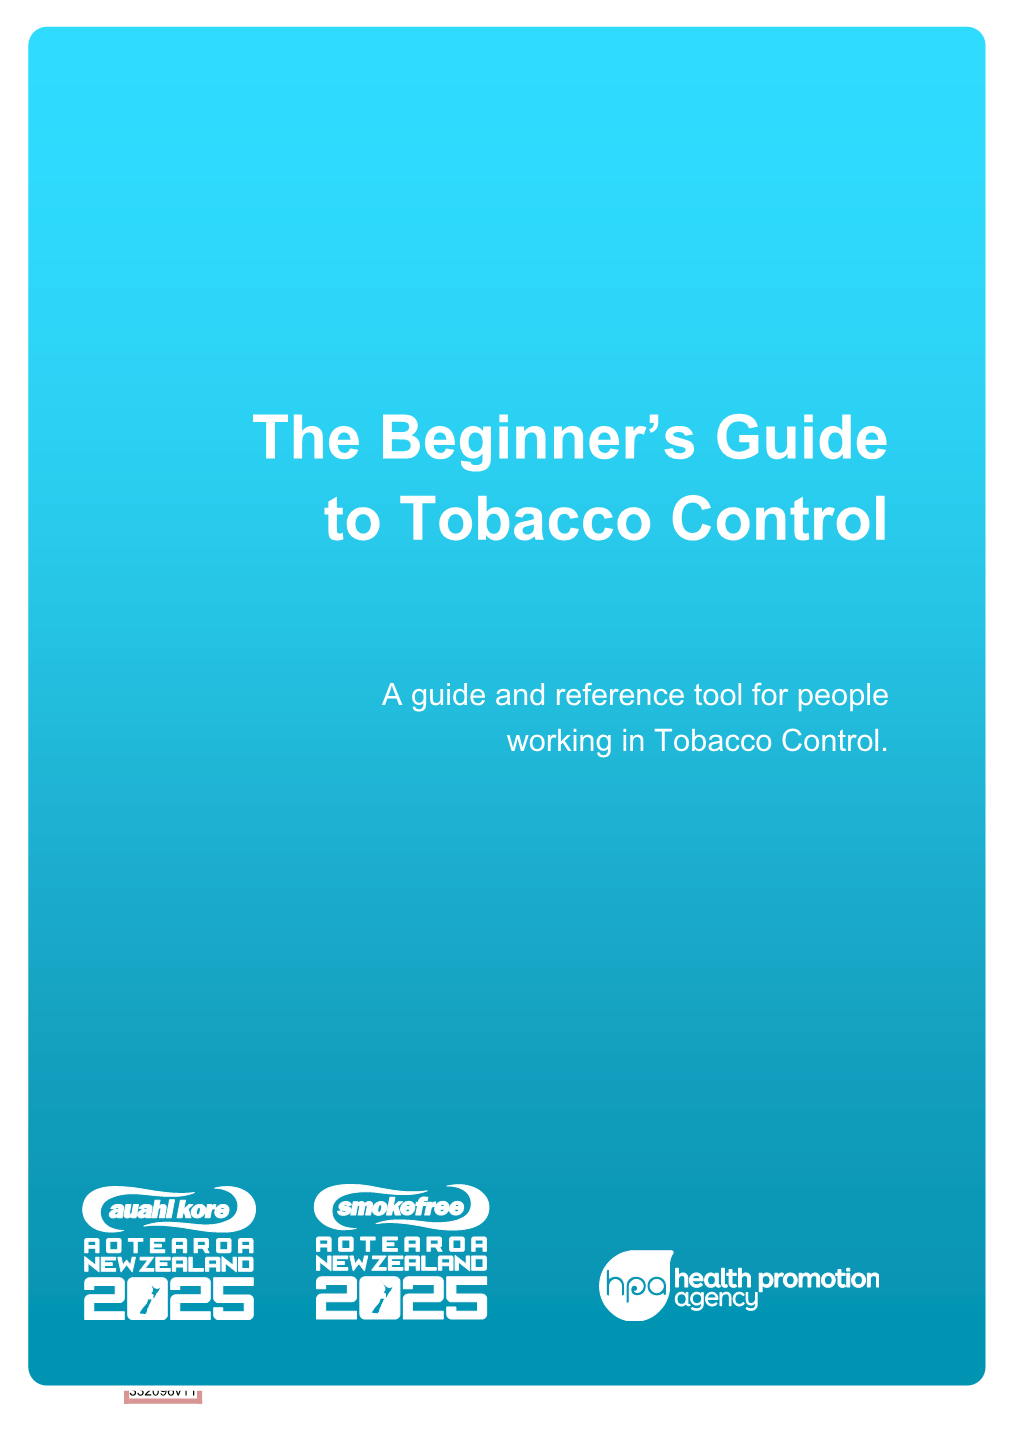 Beginner's Guide to Tobacco Control